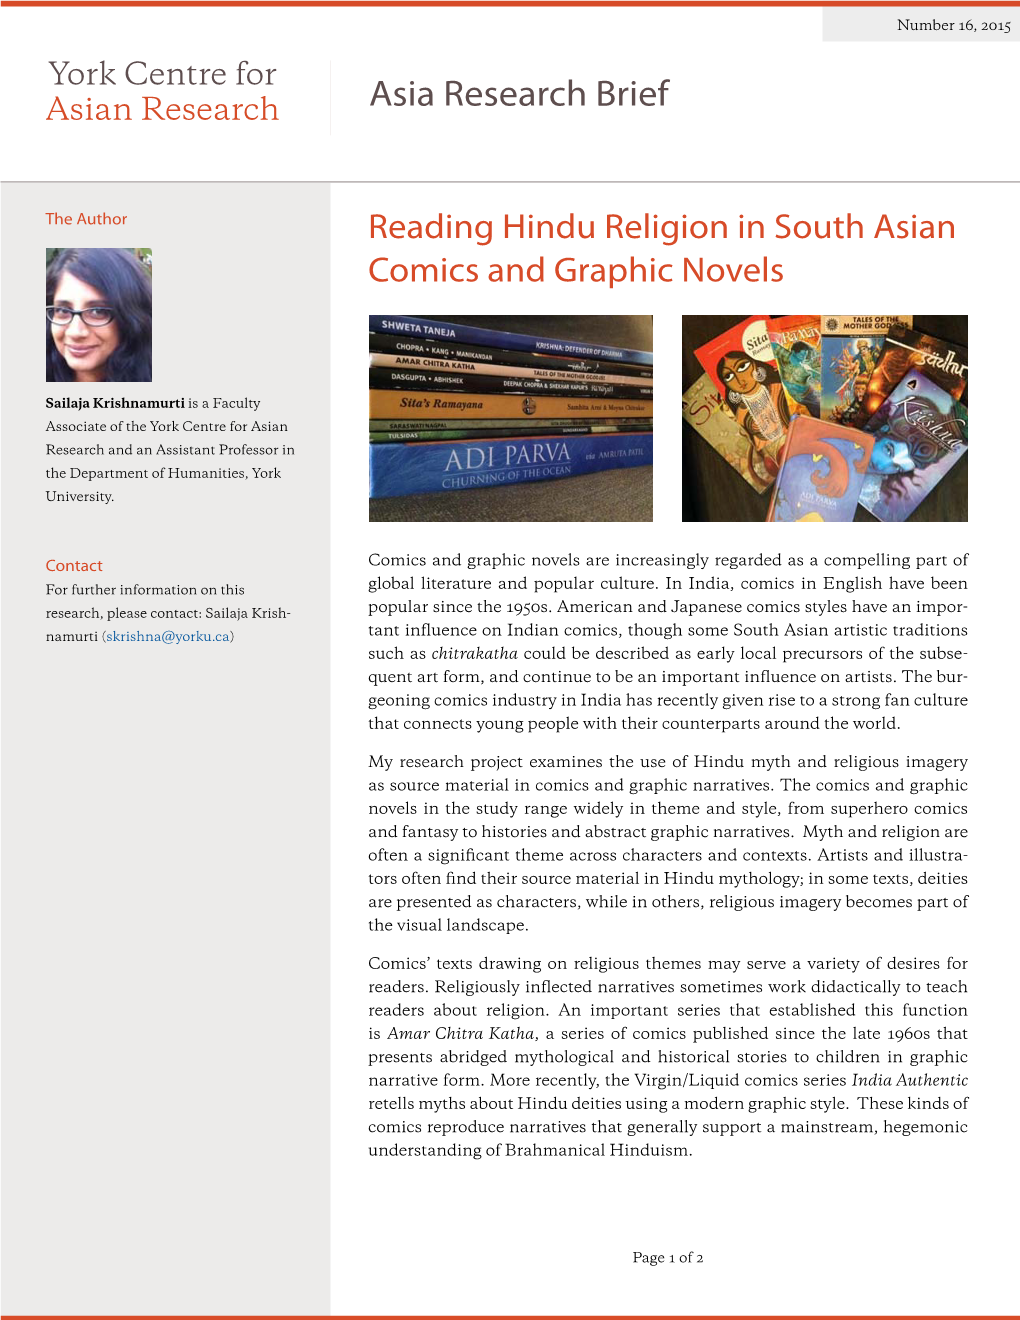 Reading Hindu Religion in South Asian Comics and Graphic Novels